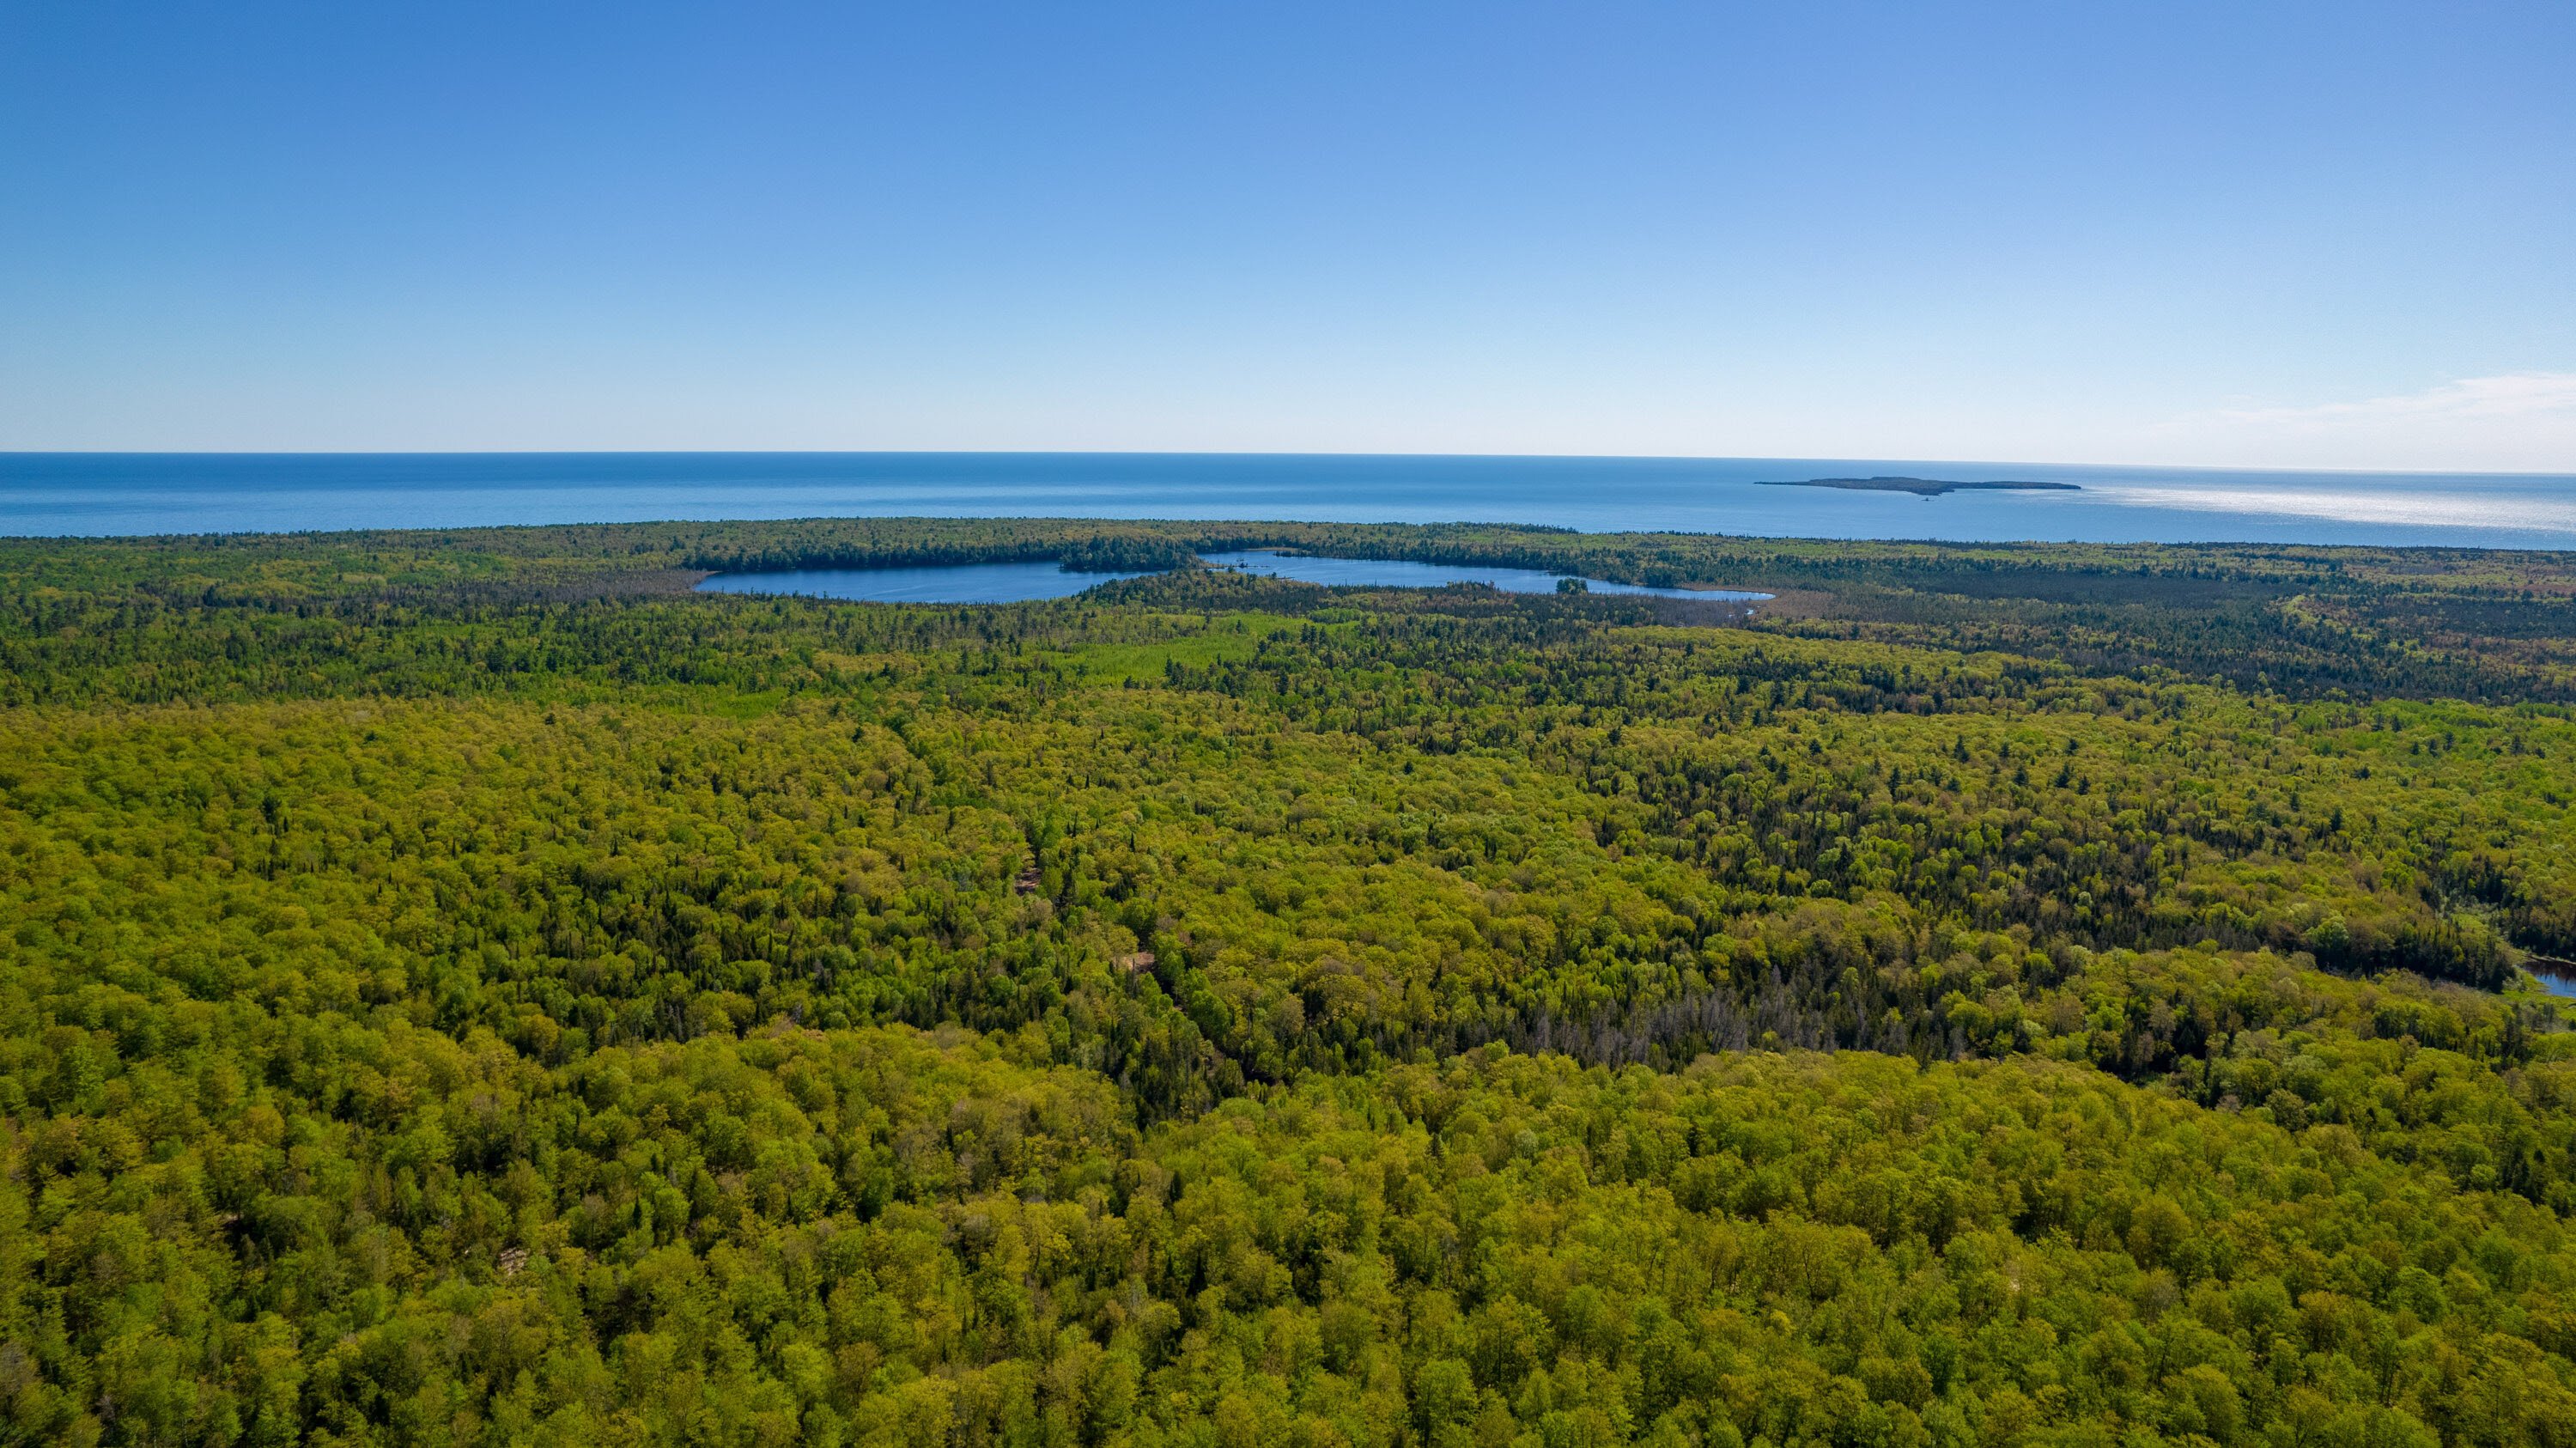 Land like this in Michigan’s Keweenaw Peninsula will be conserved after a massive sale. 